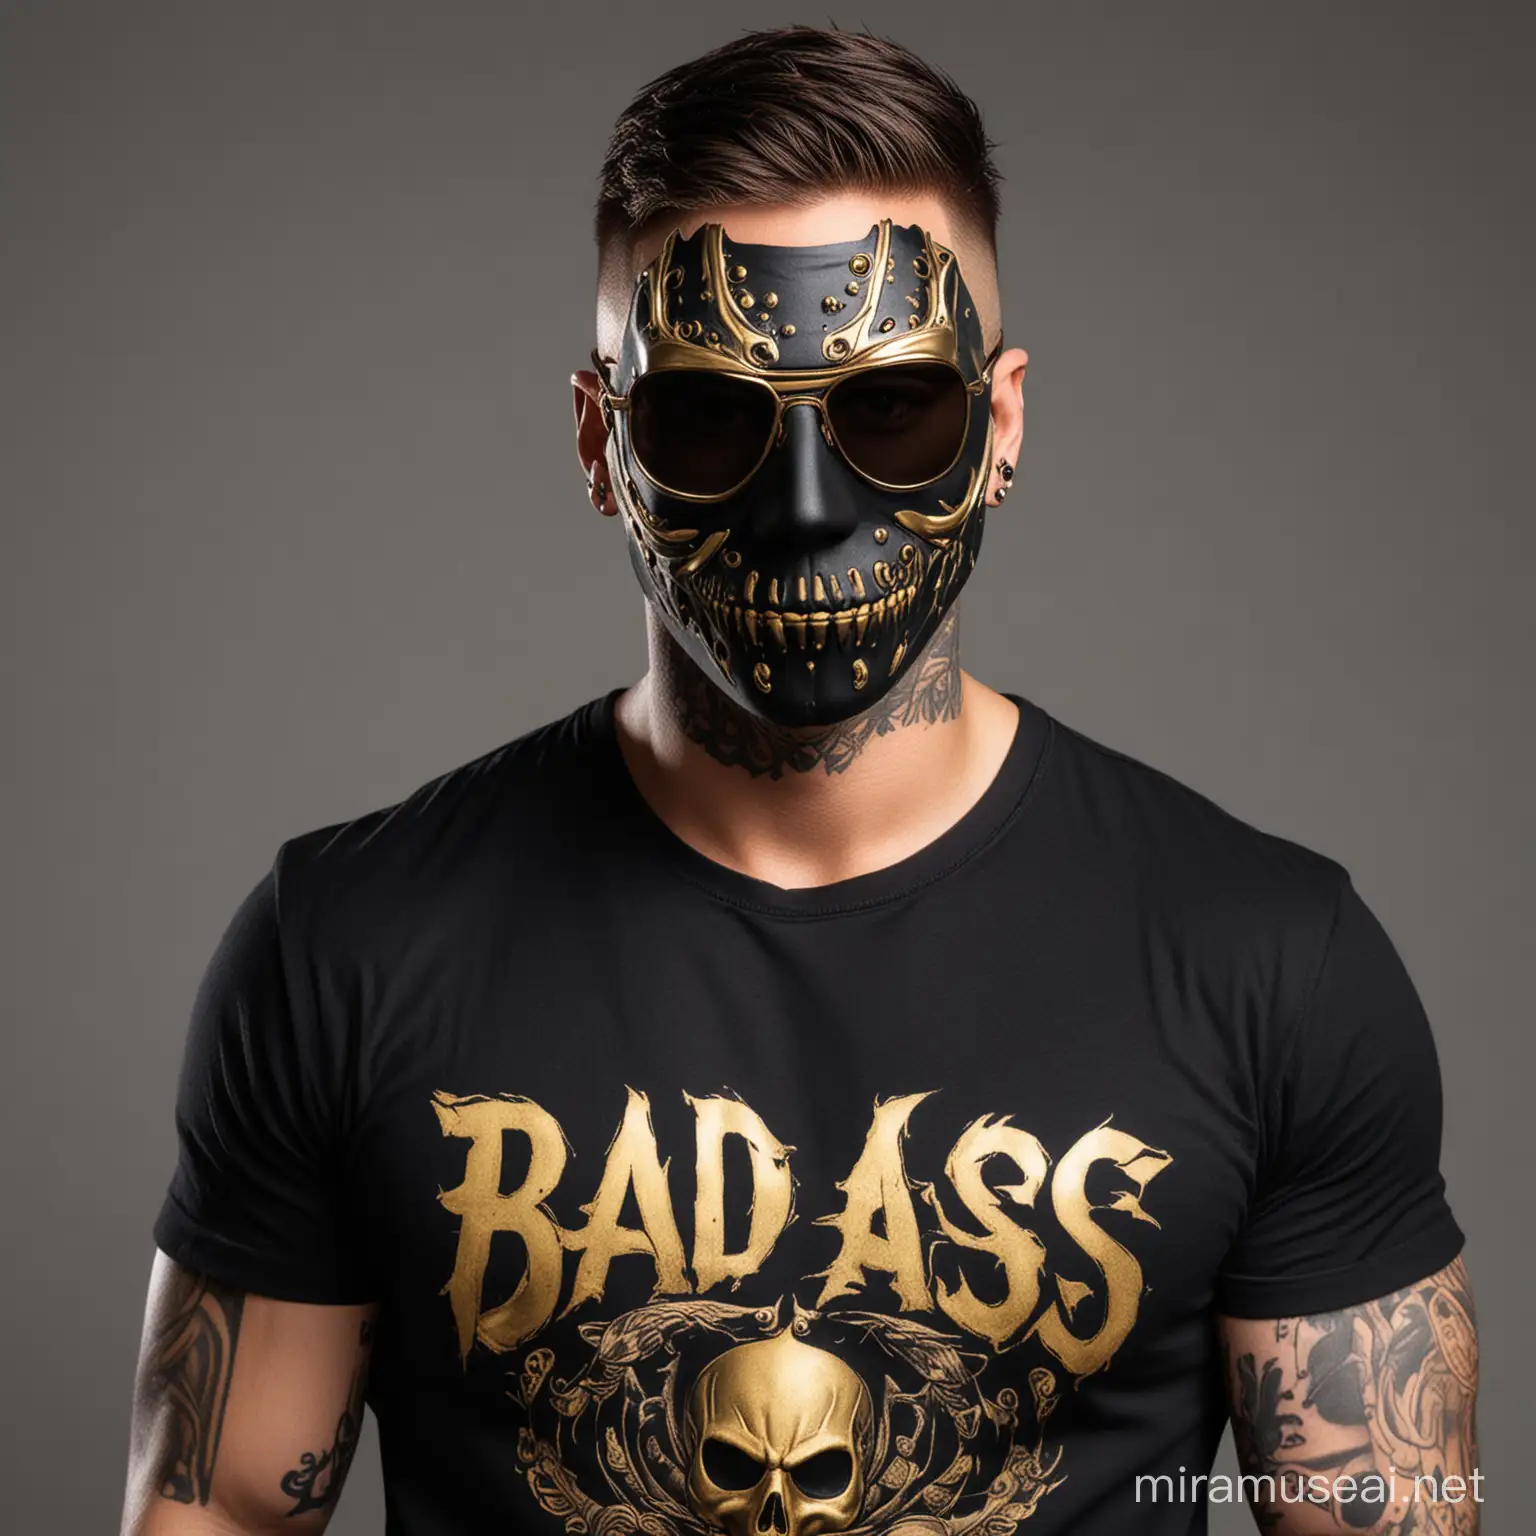 bad ass  
 looking guy wearing black  jason mask full image 
with tattoos and stunner gold shades
 wearing black blank tshirt 

